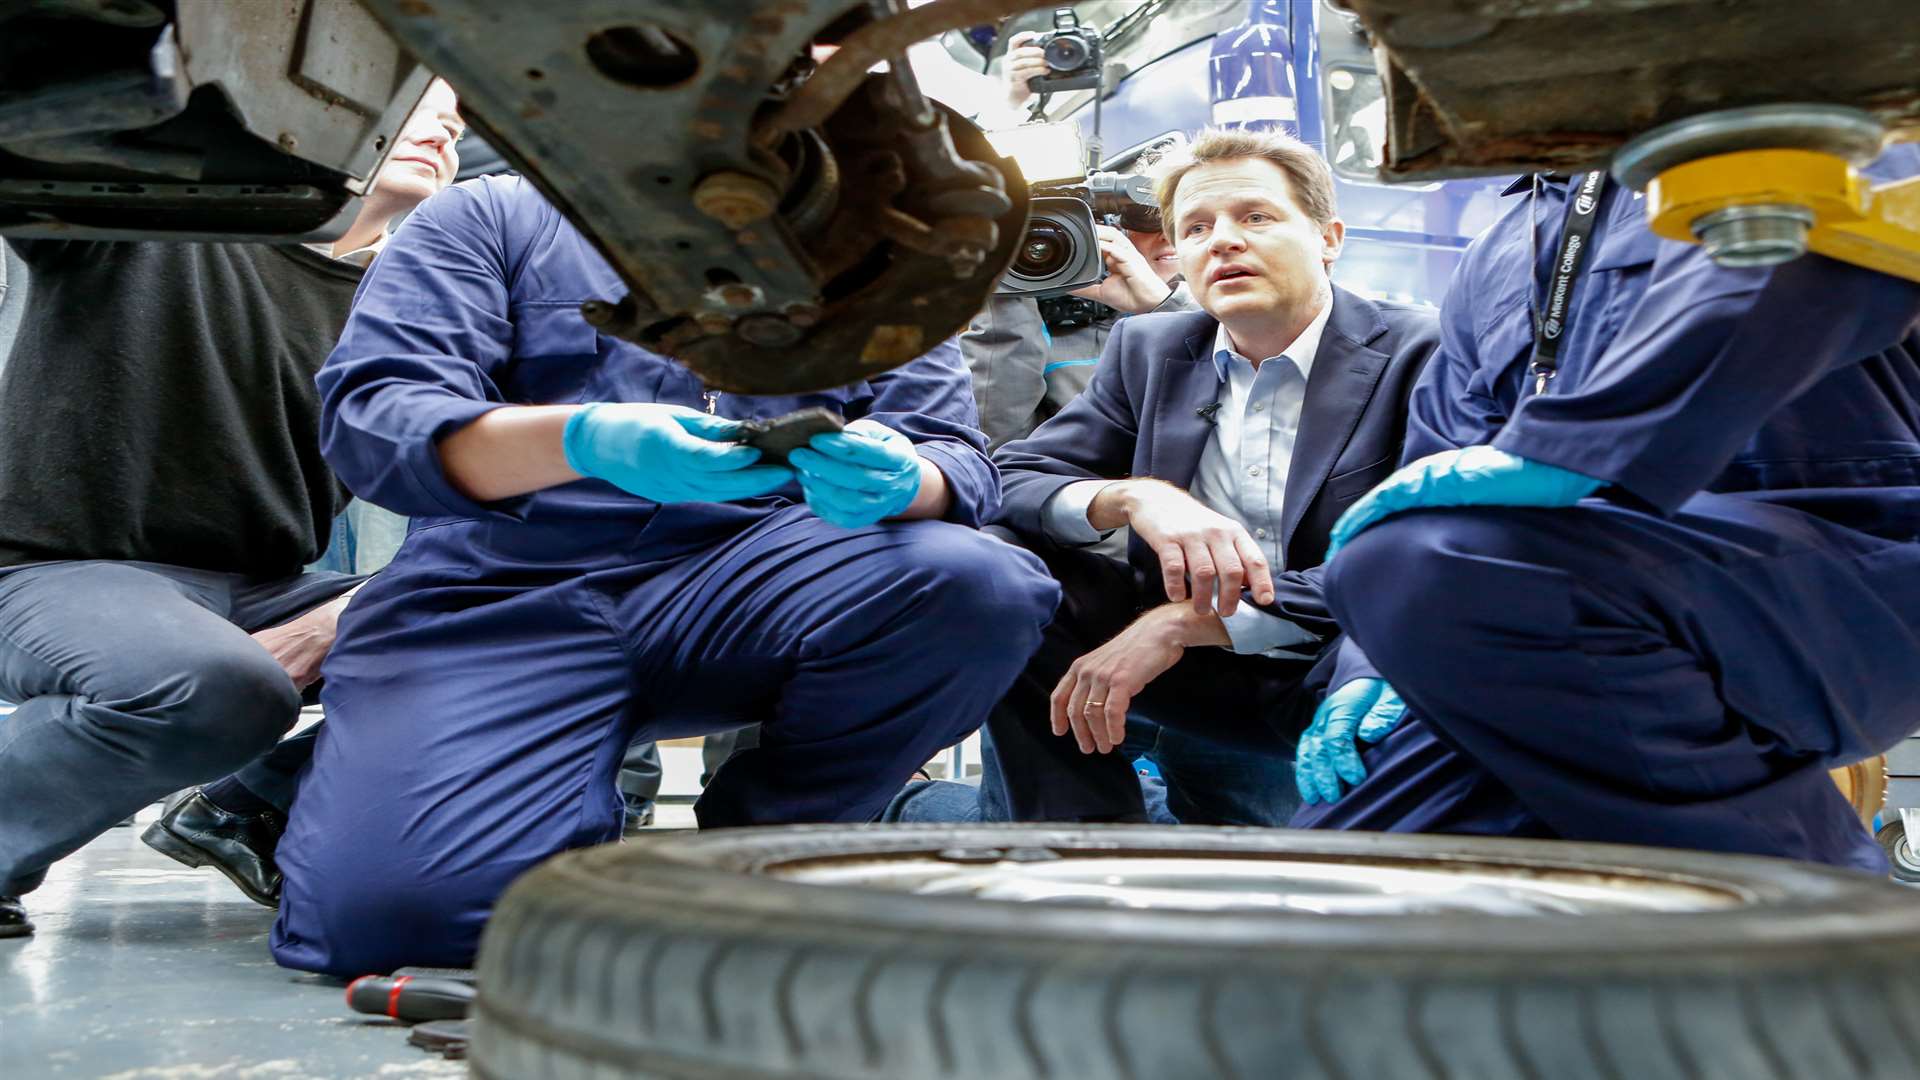 Mr Clegg swung by the college's motor vehicle workshop